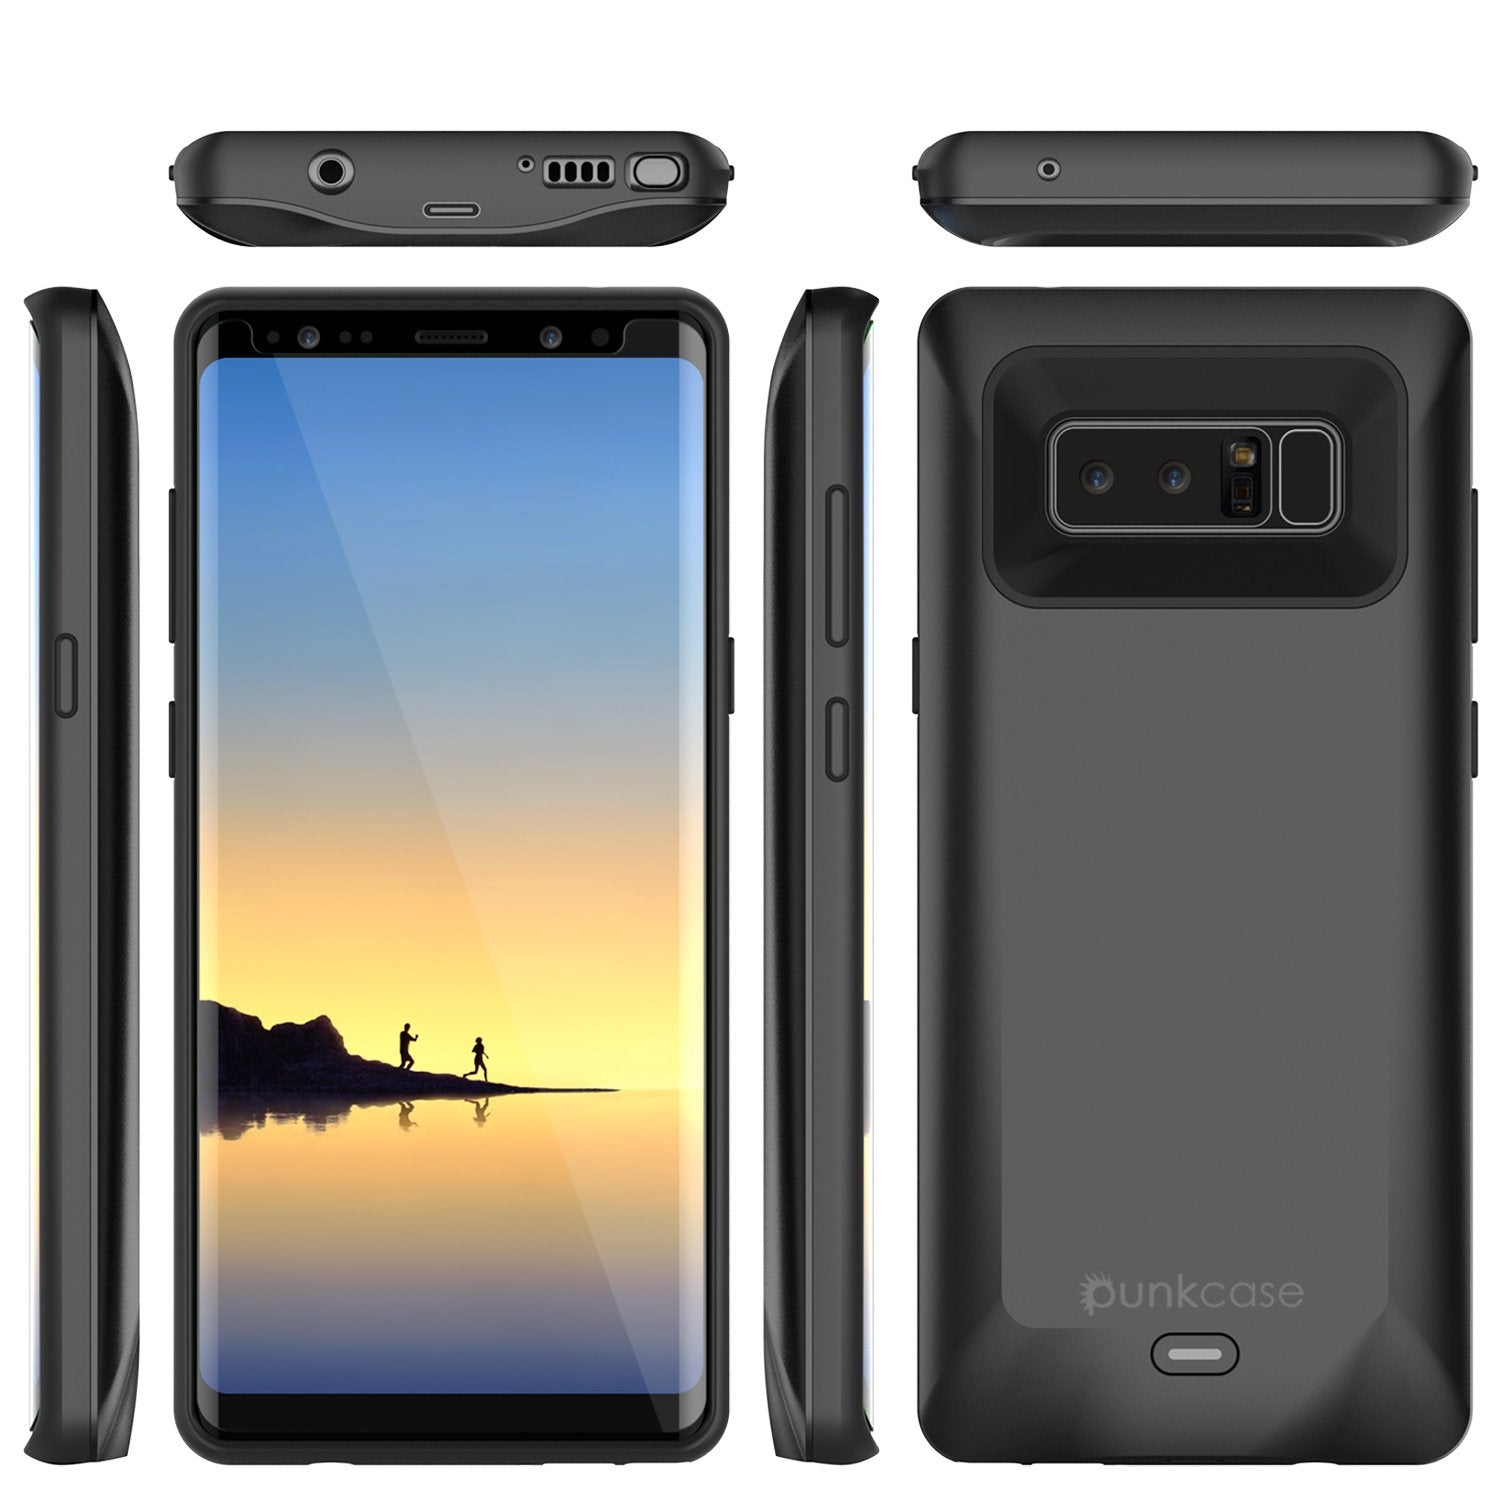 Galaxy Note 8 Battery PunkCase, 5000mAH Charger Case W/USB port, Black